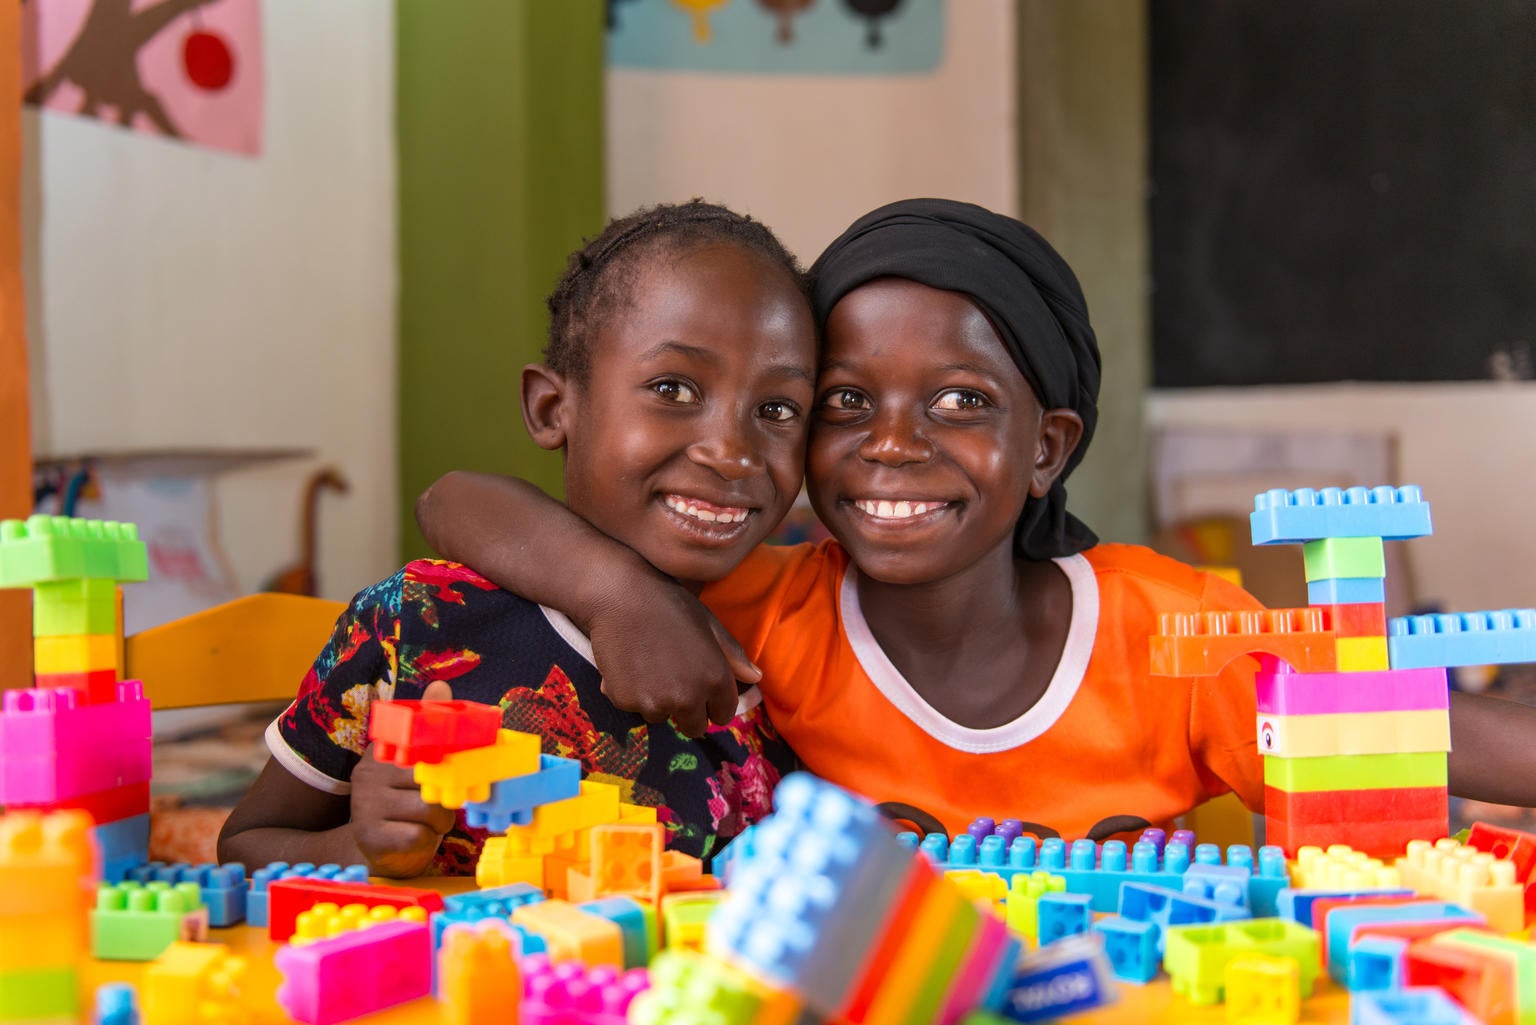 Two Zambia girls smiling at the camera